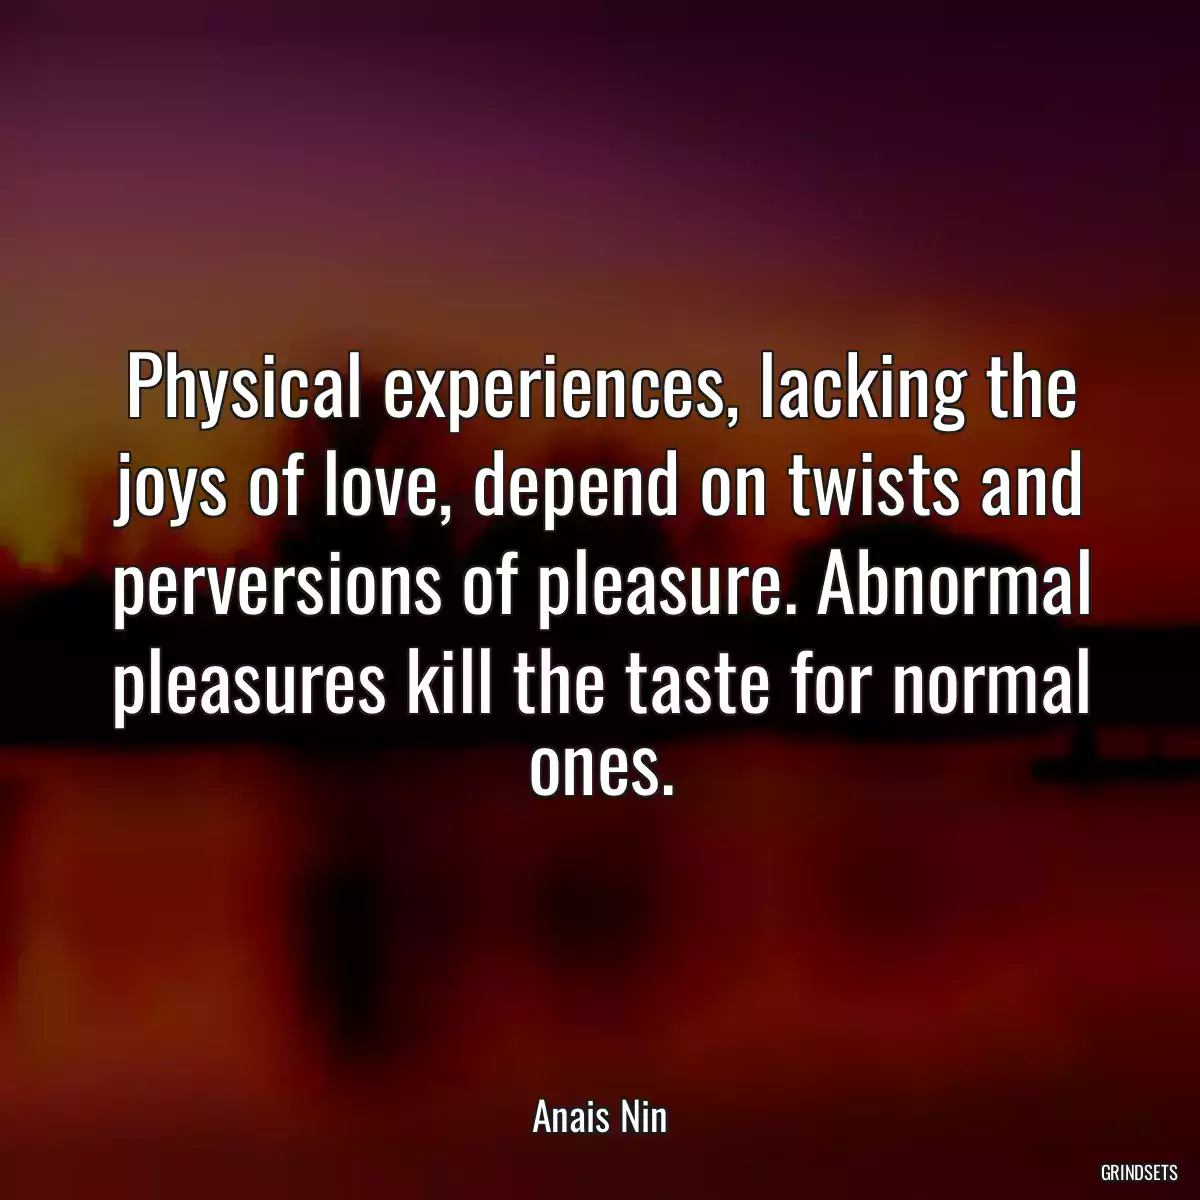 Physical experiences, lacking the joys of love, depend on twists and perversions of pleasure. Abnormal pleasures kill the taste for normal ones.